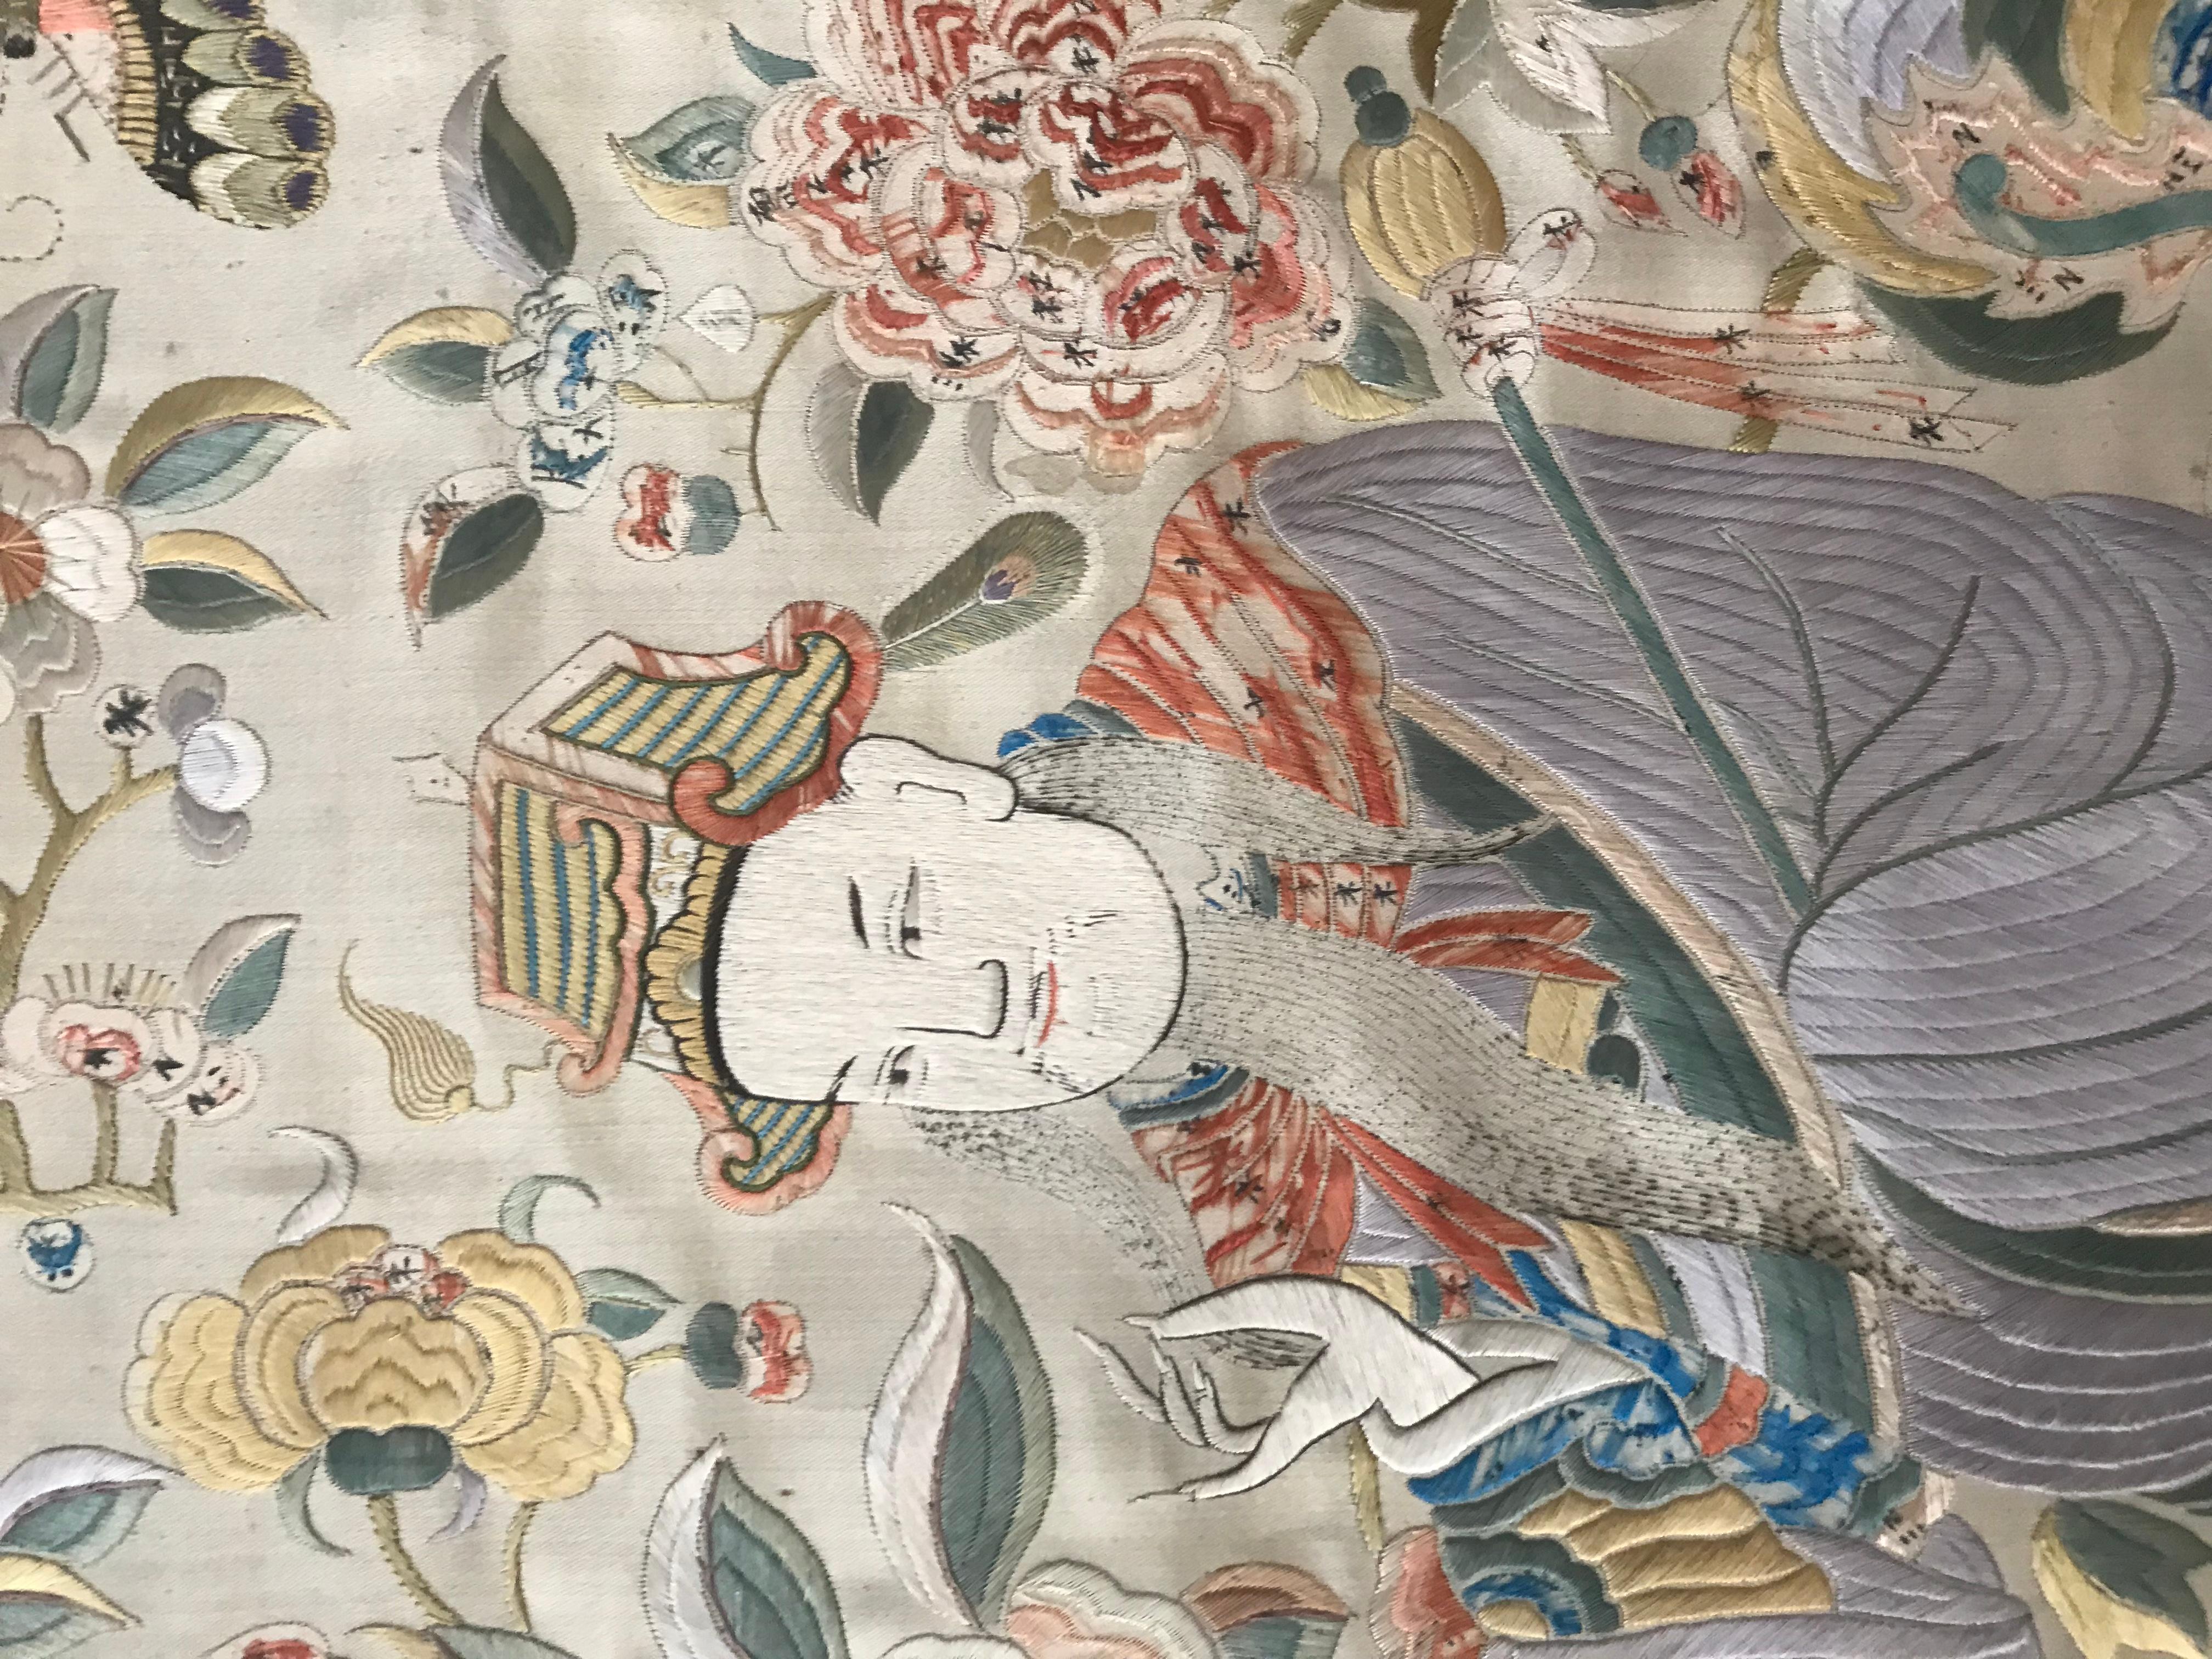 Very fine and decorative Chinese embroidery, silk on silk, early 20th century, with some damages at the up on silk background.

